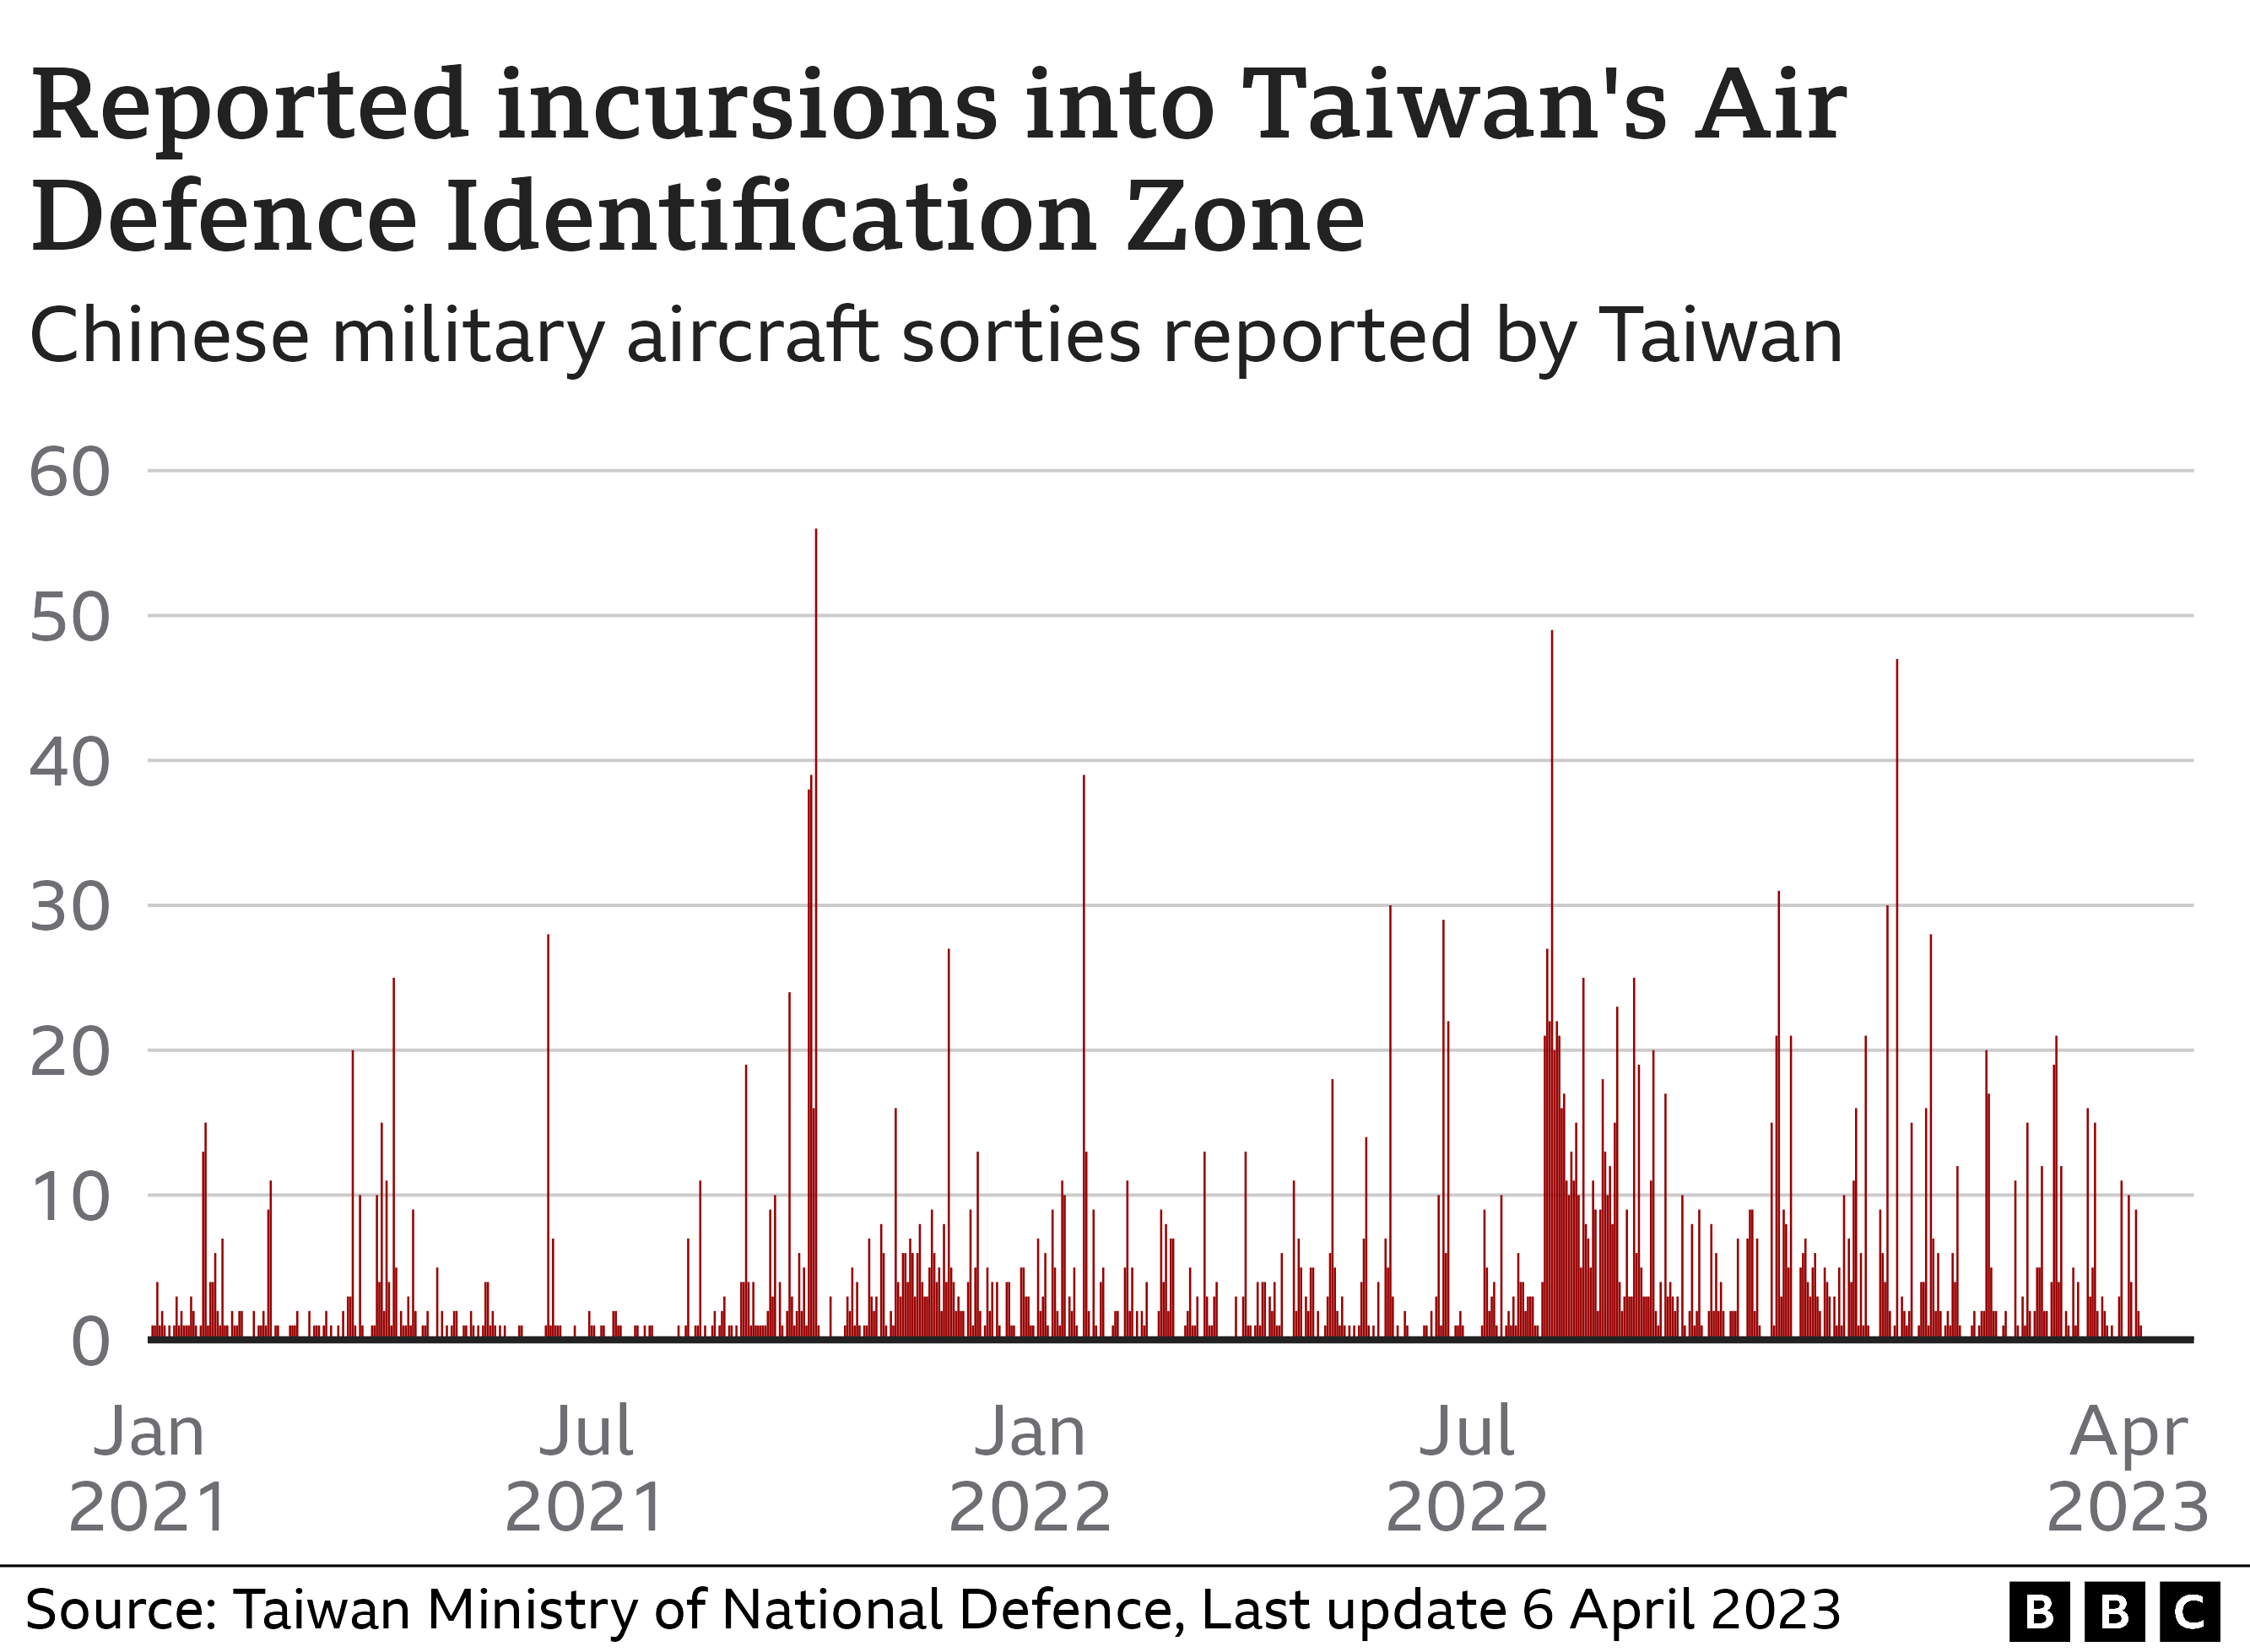 Chart showing reported incursions into Taiwan's Air Defence Identification Zone. Updated 6 April 2023.